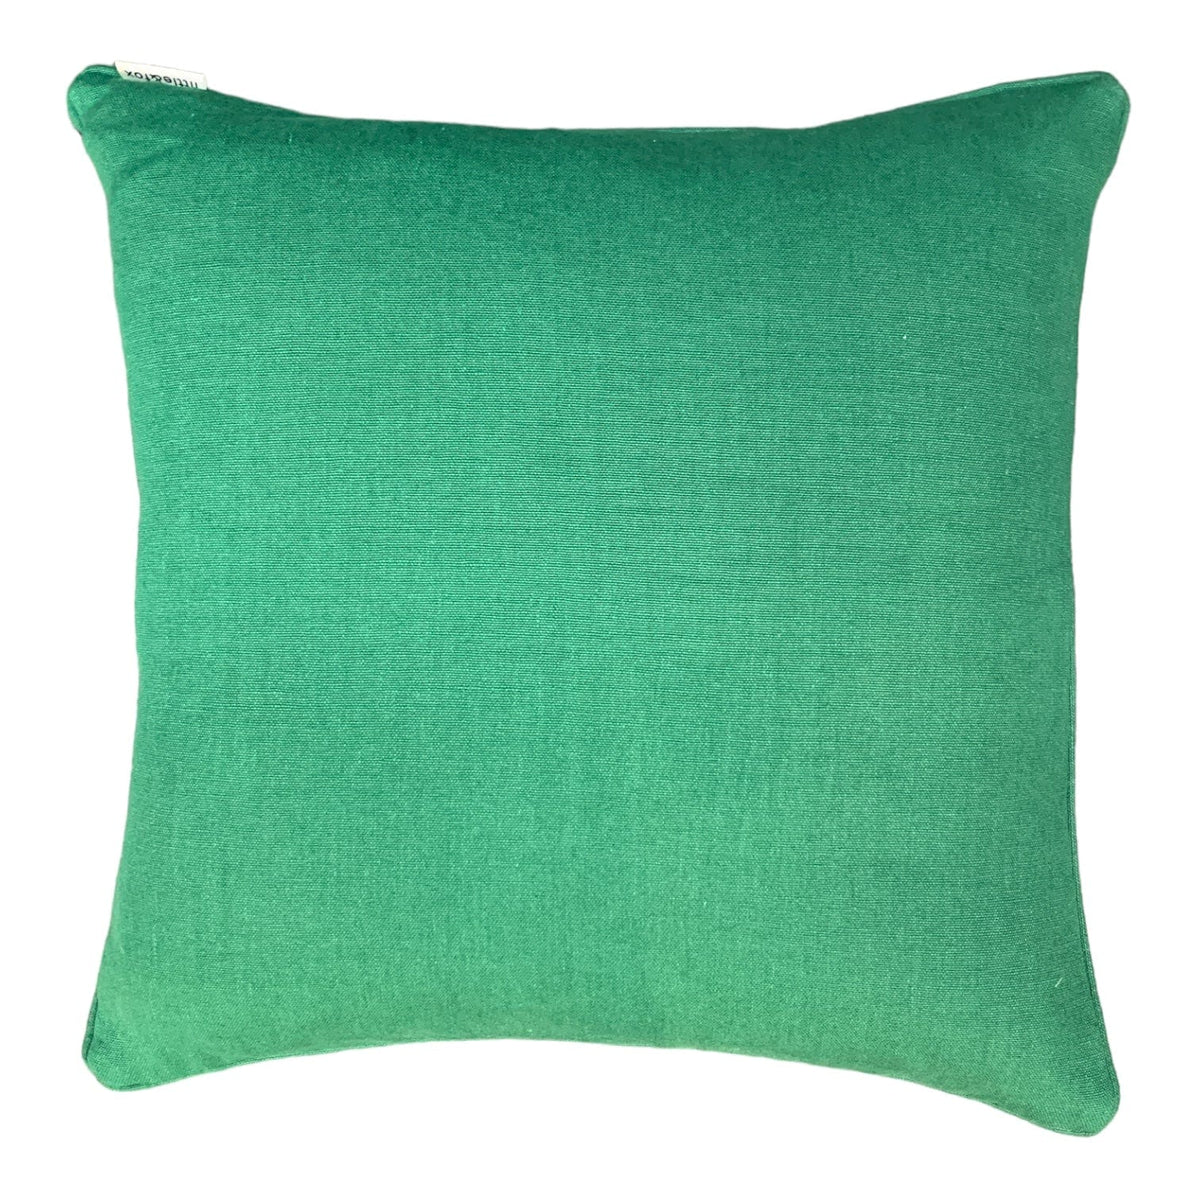 Meander Emerald 50x50cm Piped Cushion